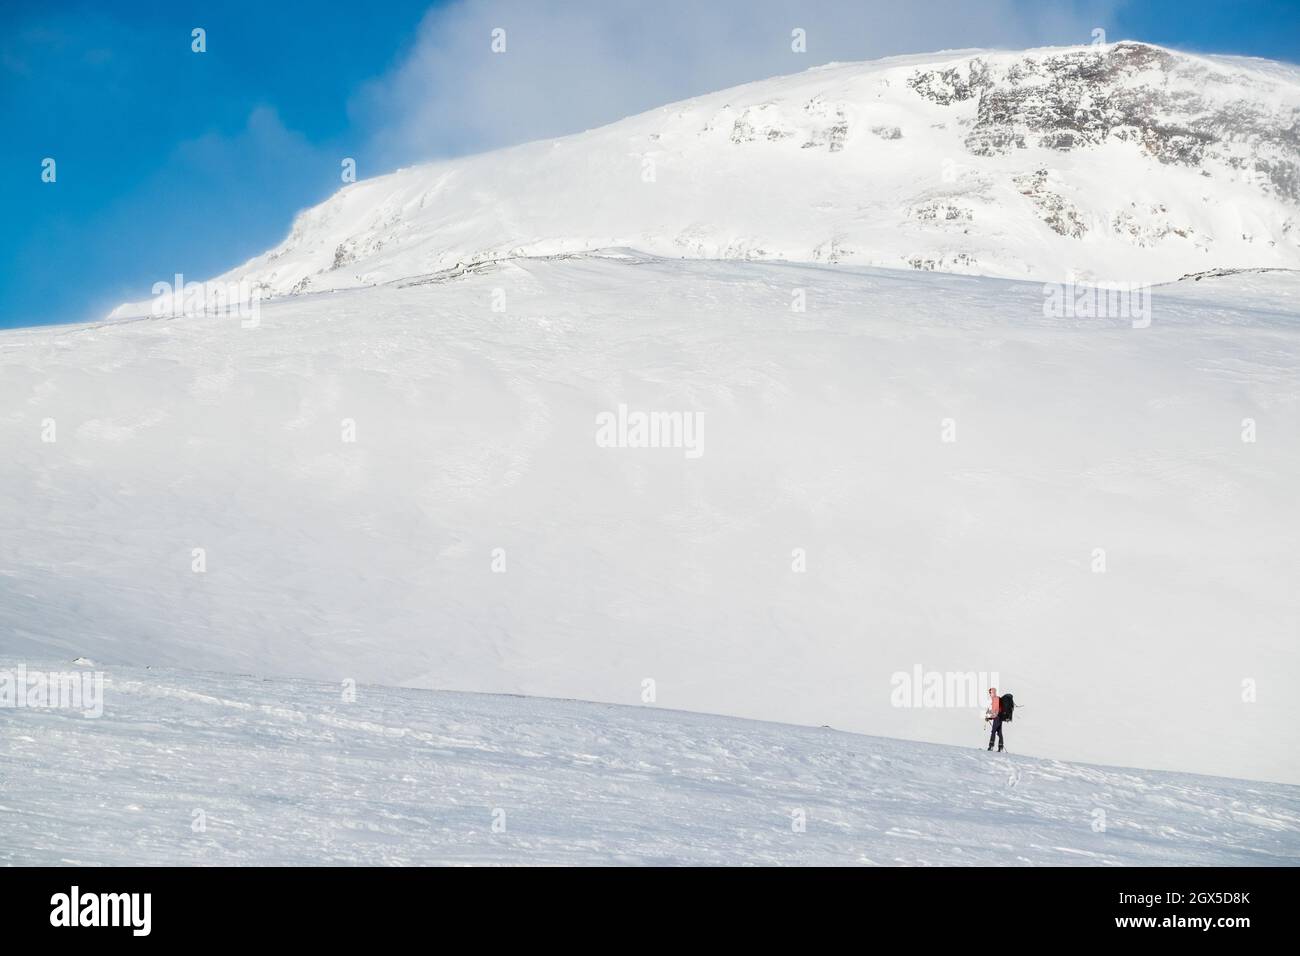 Backcountry skier in the snow covered mountains of Norway Stock Photo